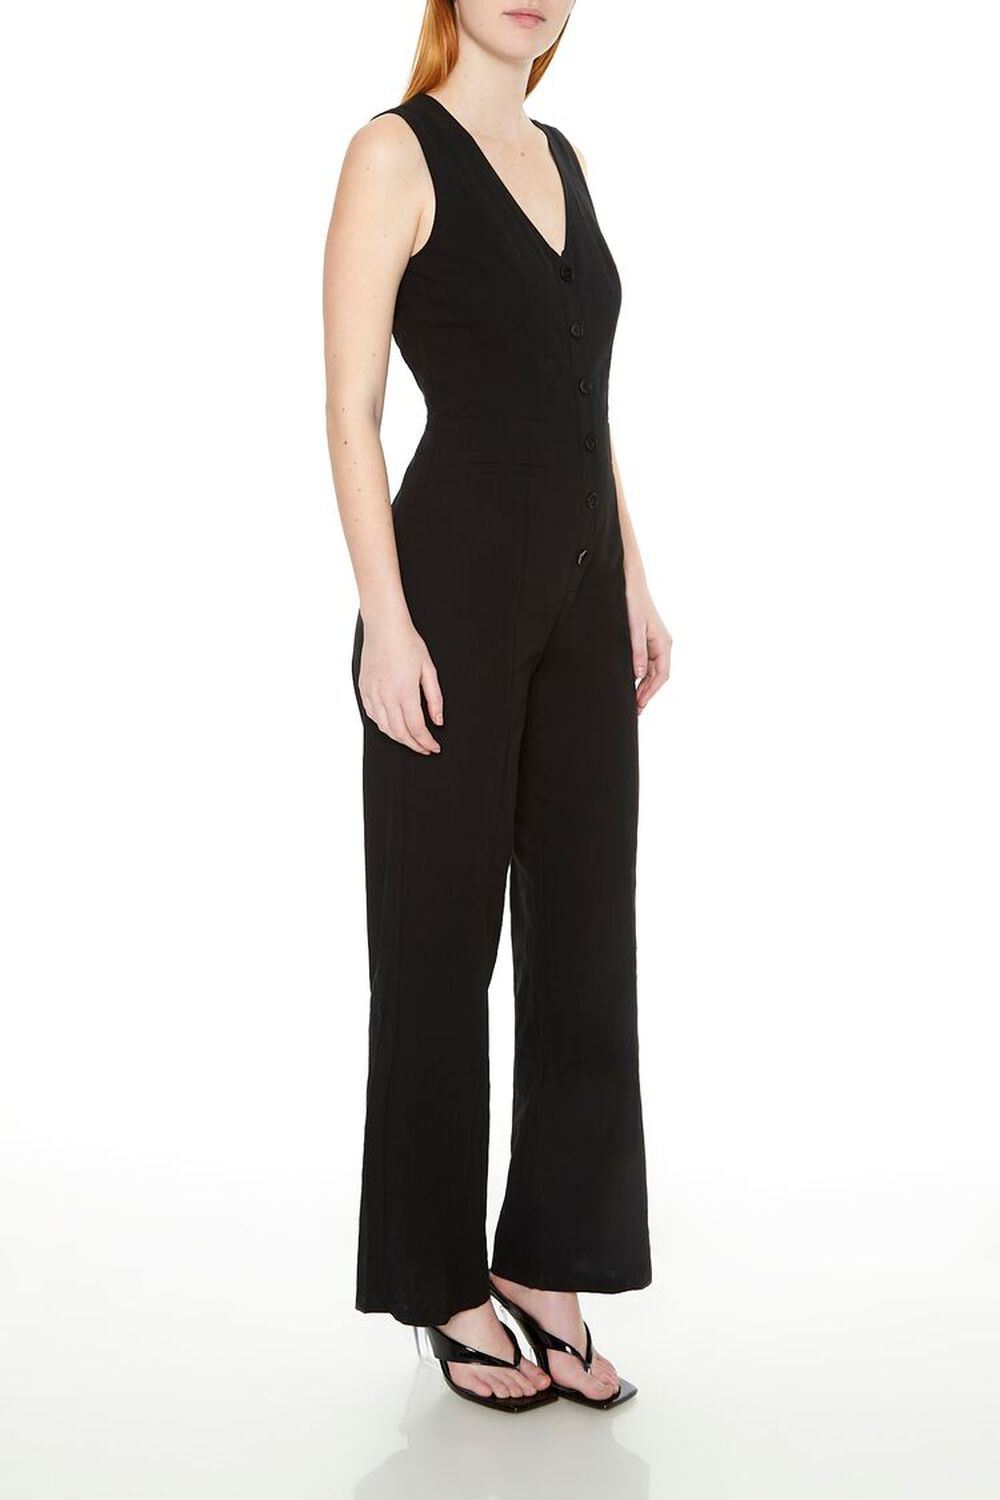 BLACK Sleeveless Button-Front Jumpsuit, image 2